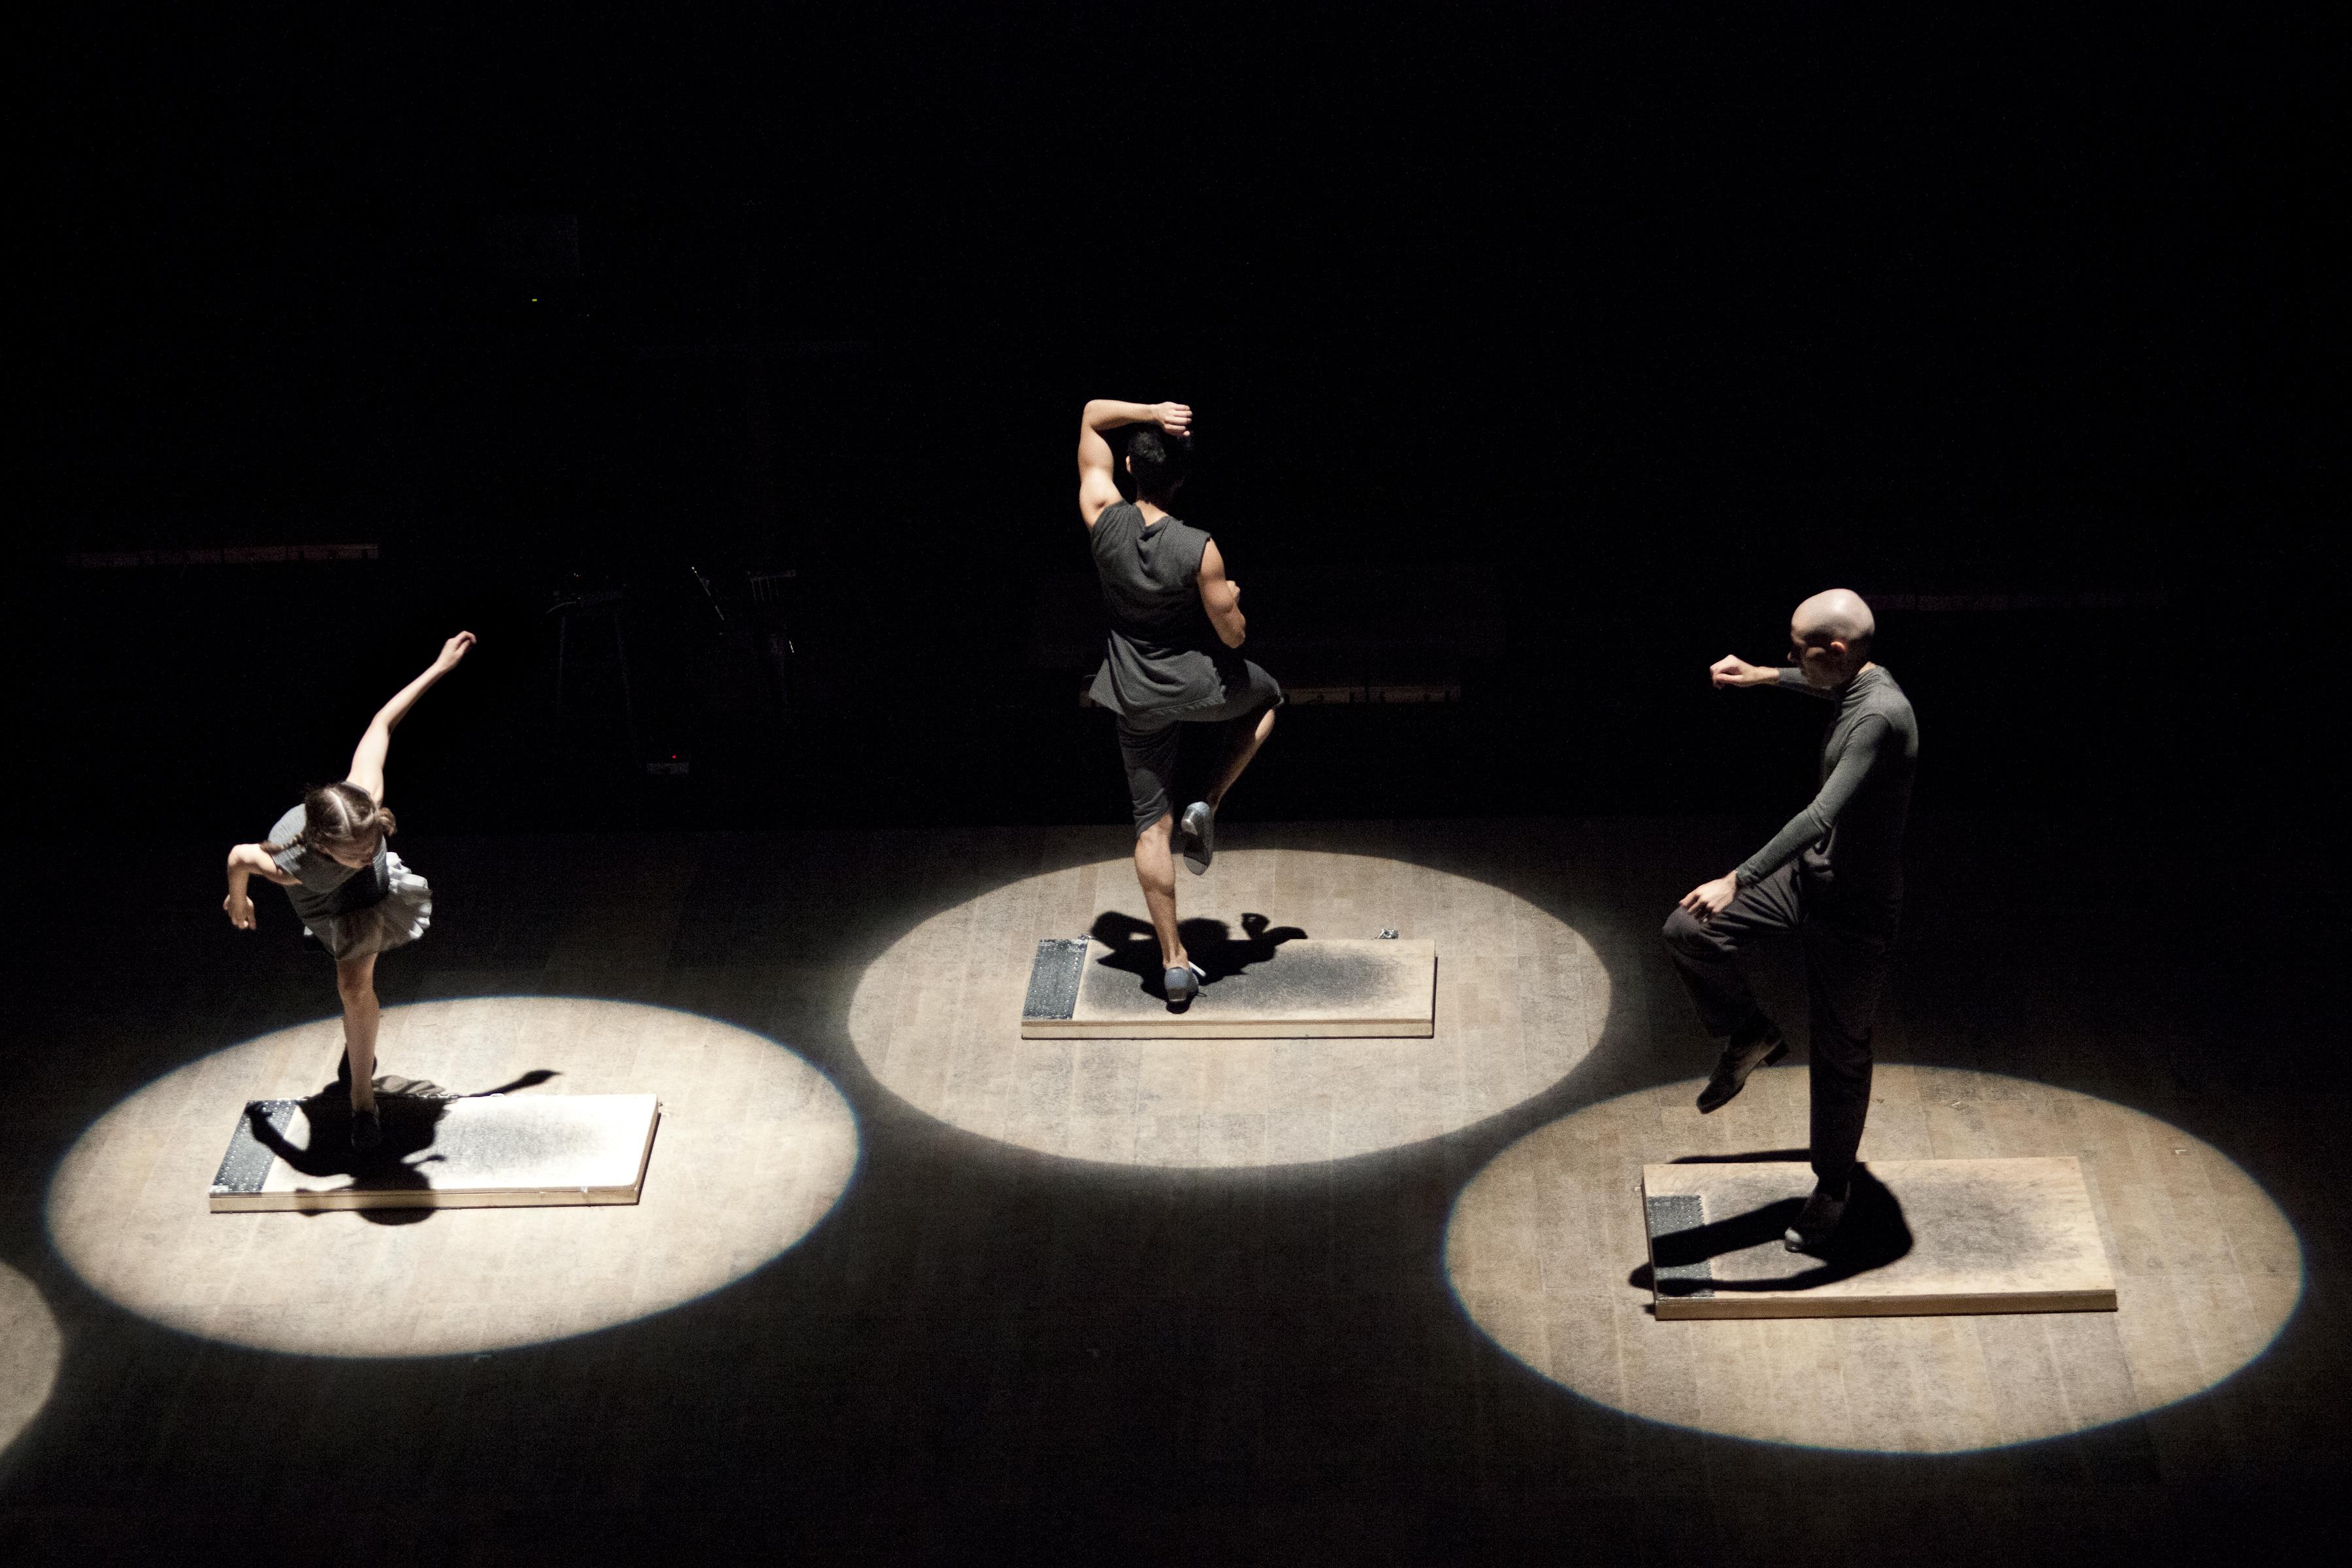 Three tap dancers dressed in black and gray—illuminated by spotlights—dance atop individually sized platforms. Each faces a different direction, and seems to be in he or her own dance.